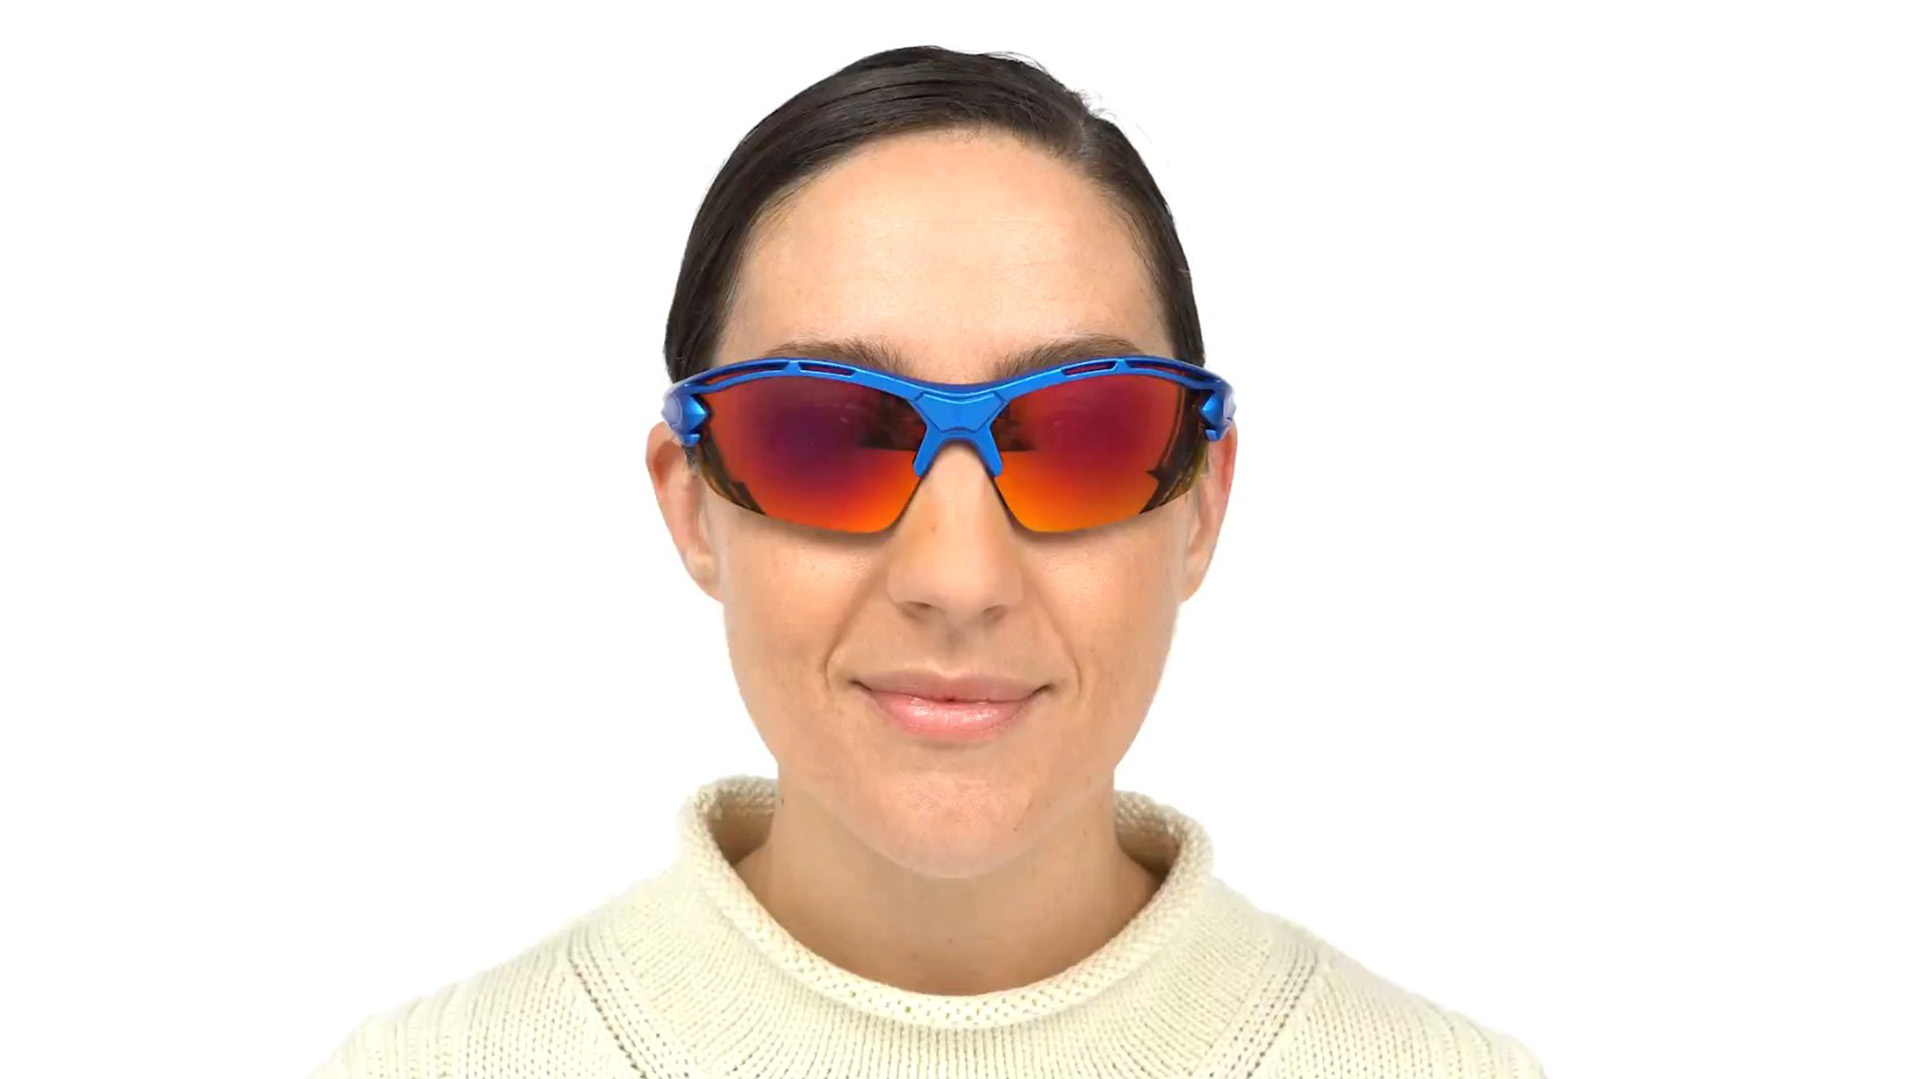 Matrix Venice Prescription Sports Glasses and Sunglasses - Best For Running, Cycling and Hunting